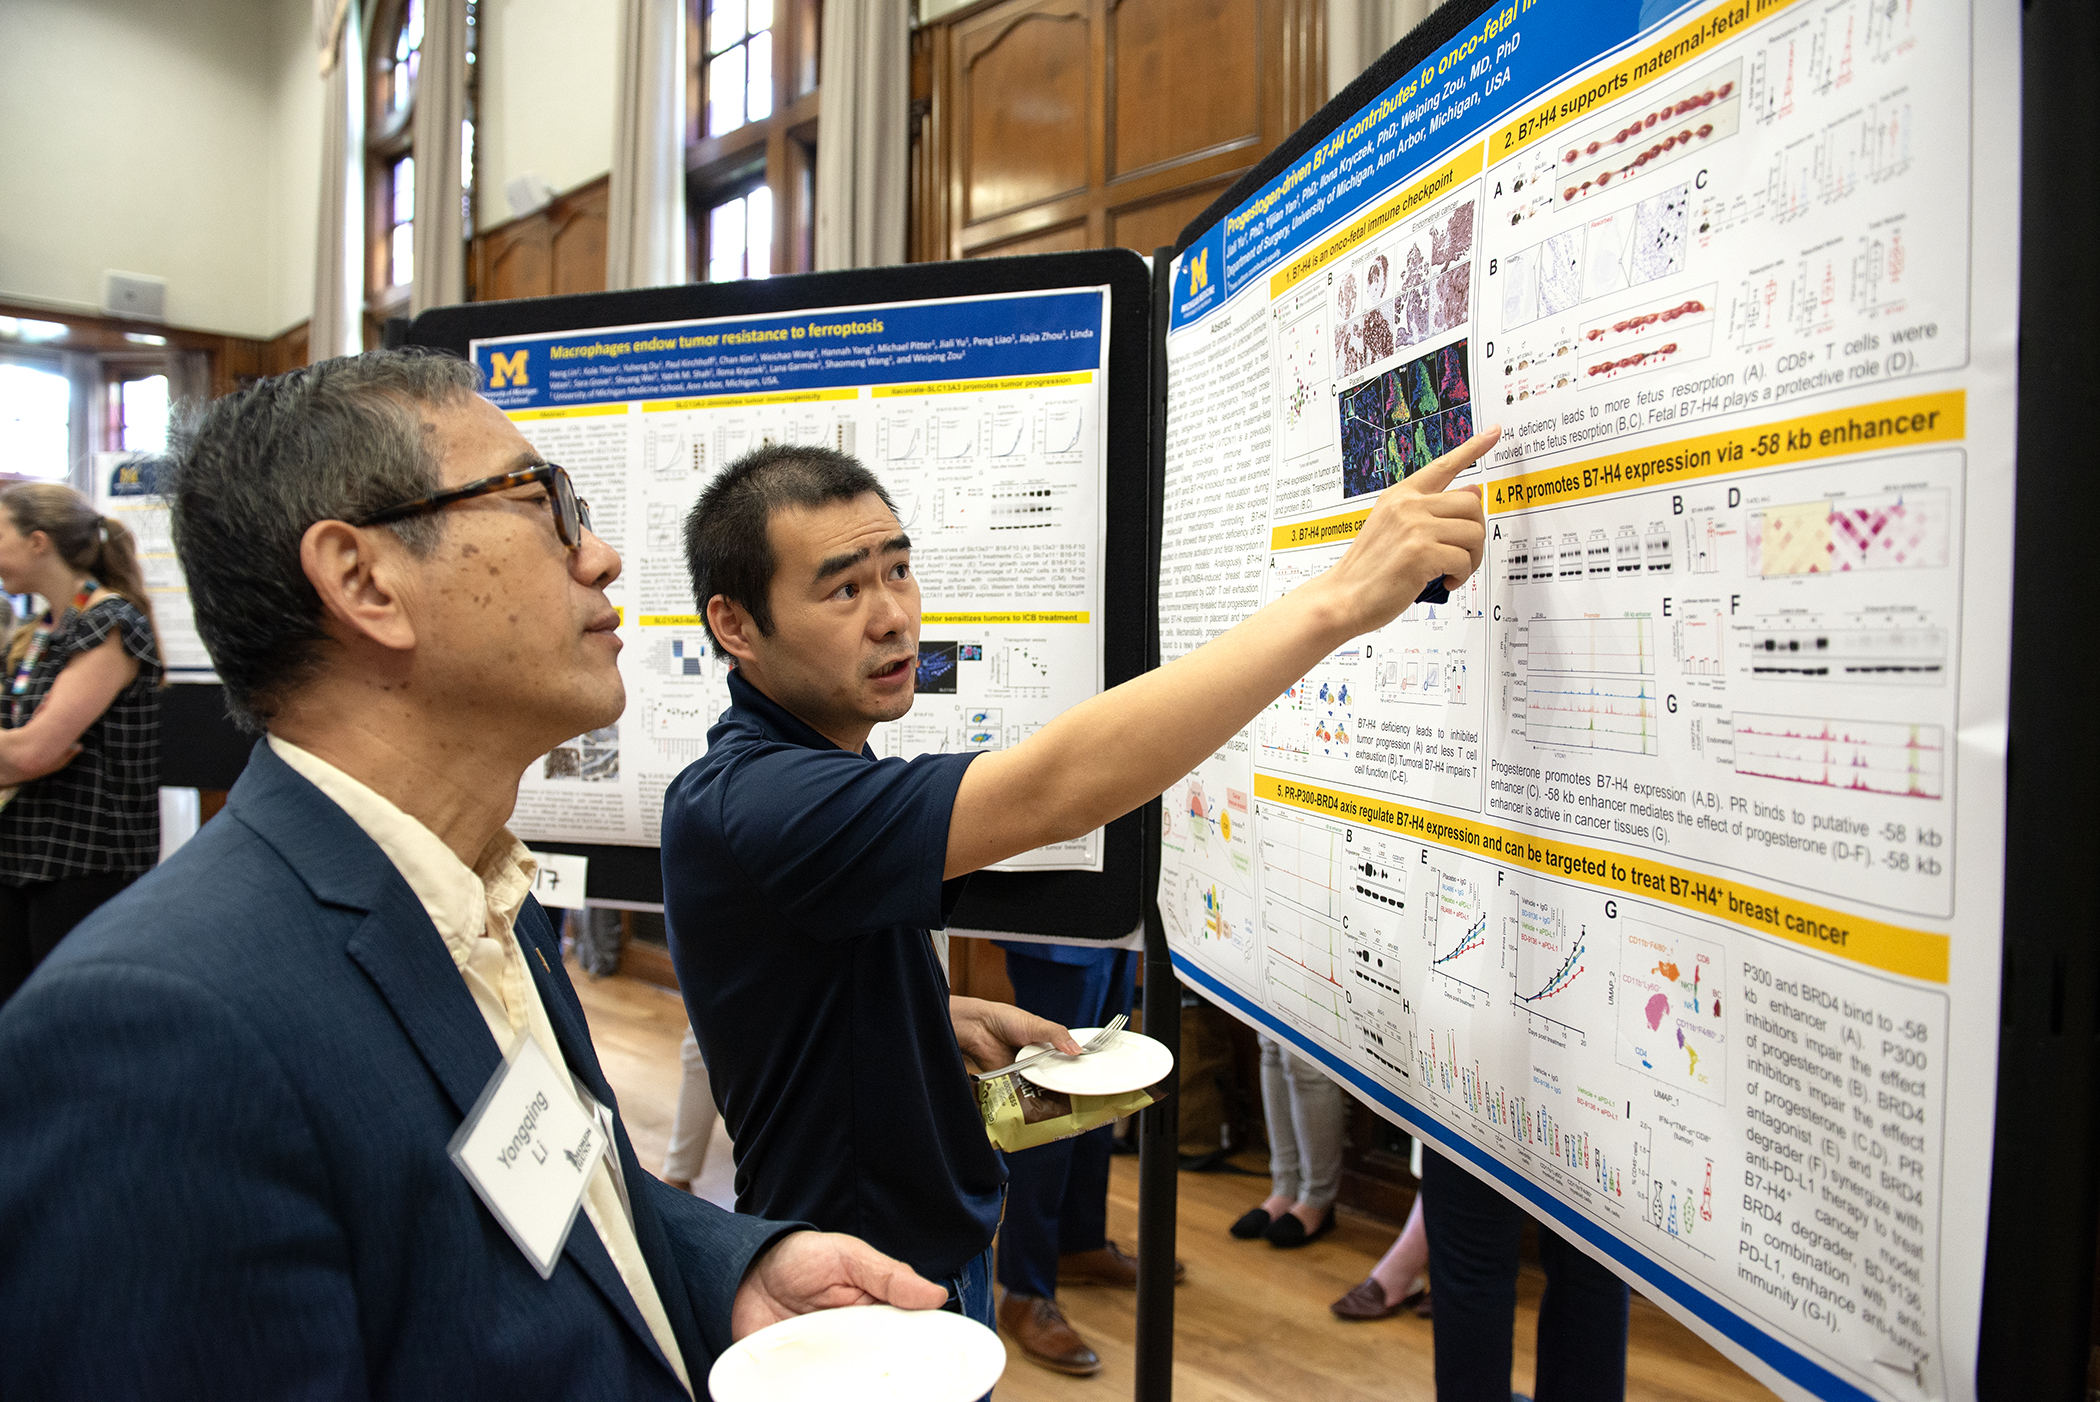 Faculty members discussing a research poster at the conference